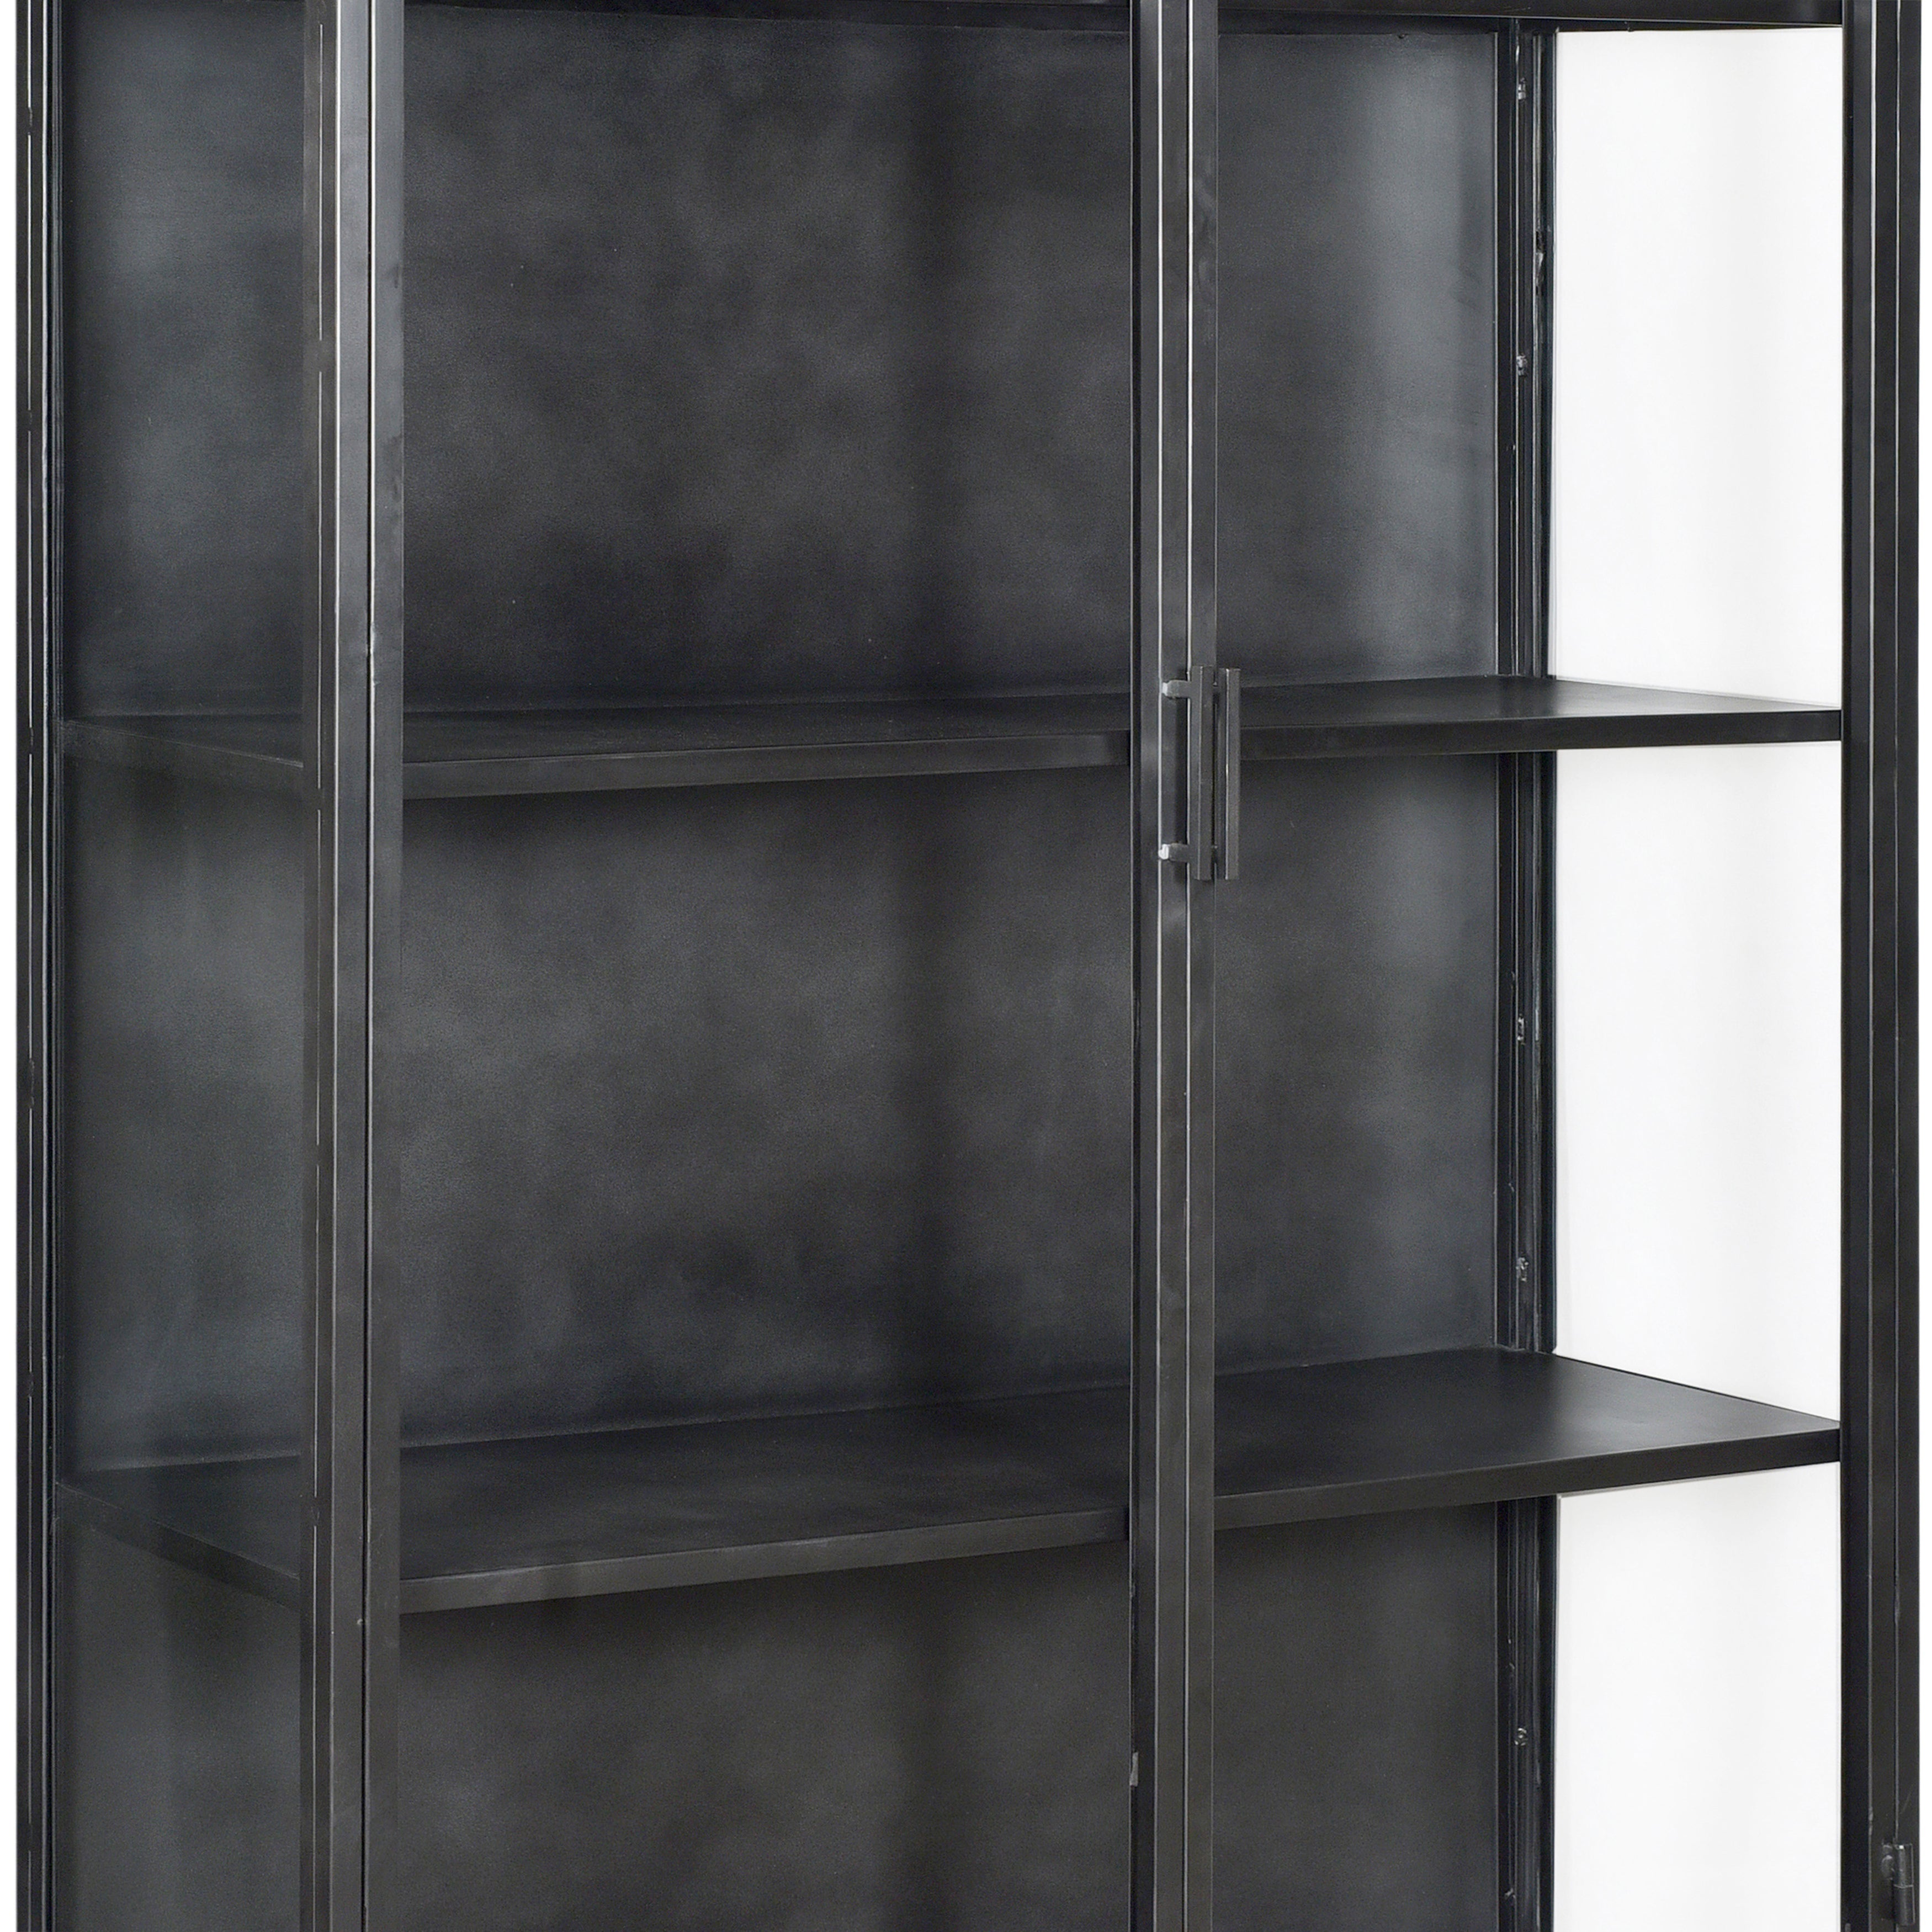 With a touch of vintage industrial style and personality, this 78” tall cabinet will add flair to your home. Designed on a brushed gunmetal, iron frame with glass doors and side panels that give view to four shelf spaces. Amethyst Home provides interior design, new home construction design consulting, vintage area rugs, and lighting in the Tampa metro area.